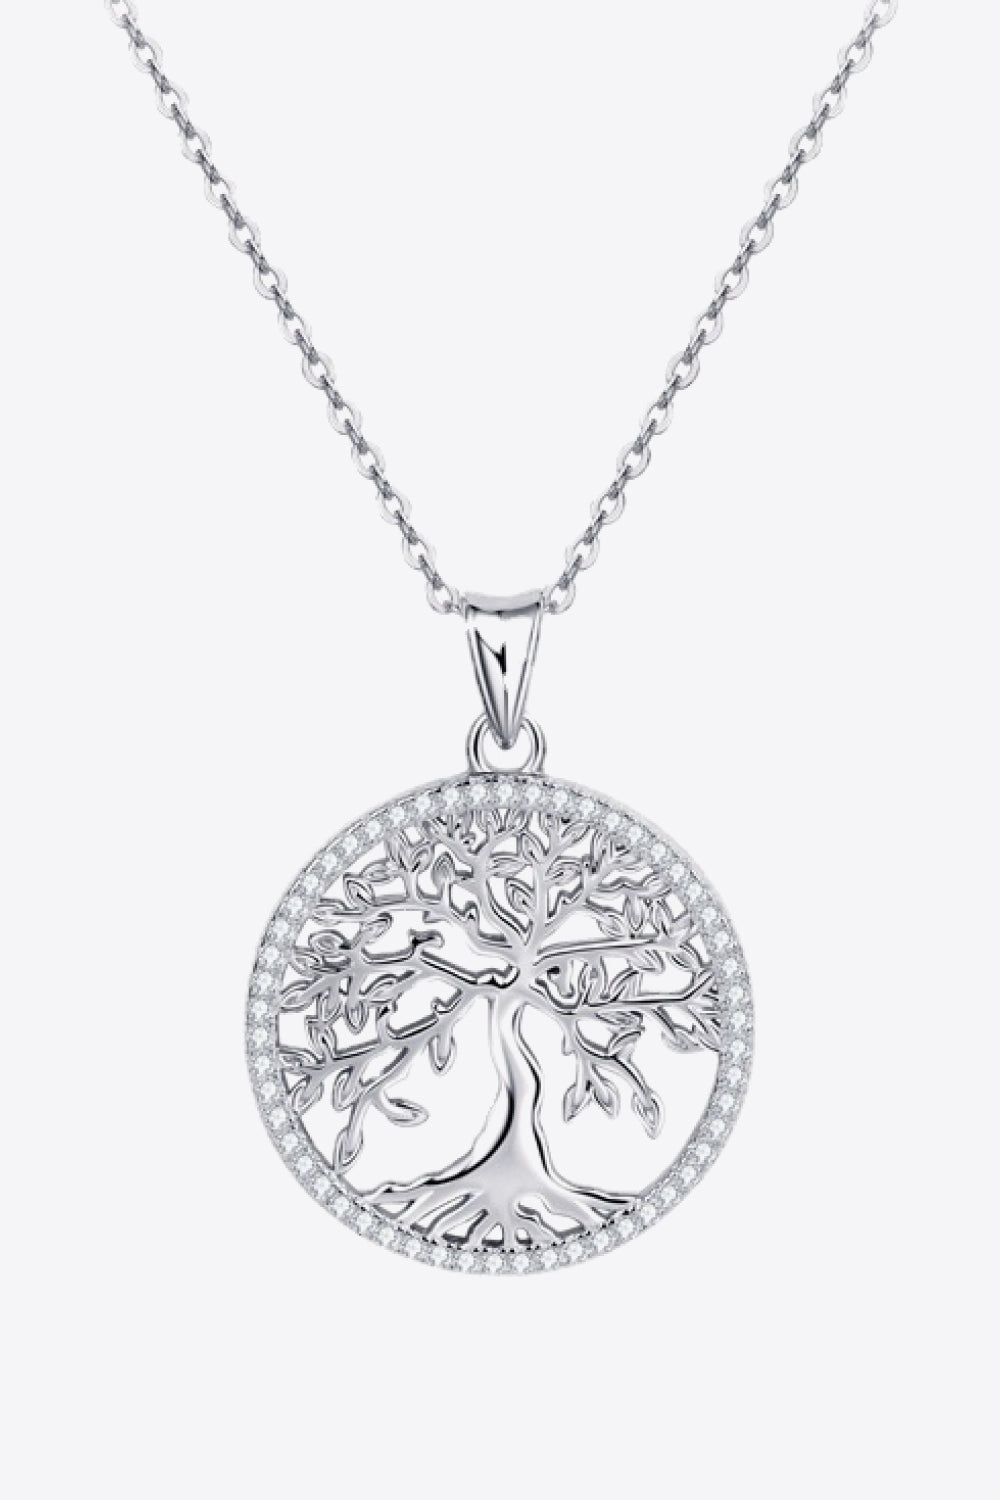 925 Sterling Silver Moissanite Tree Pendant Necklace - Necklaces - FITGGINS